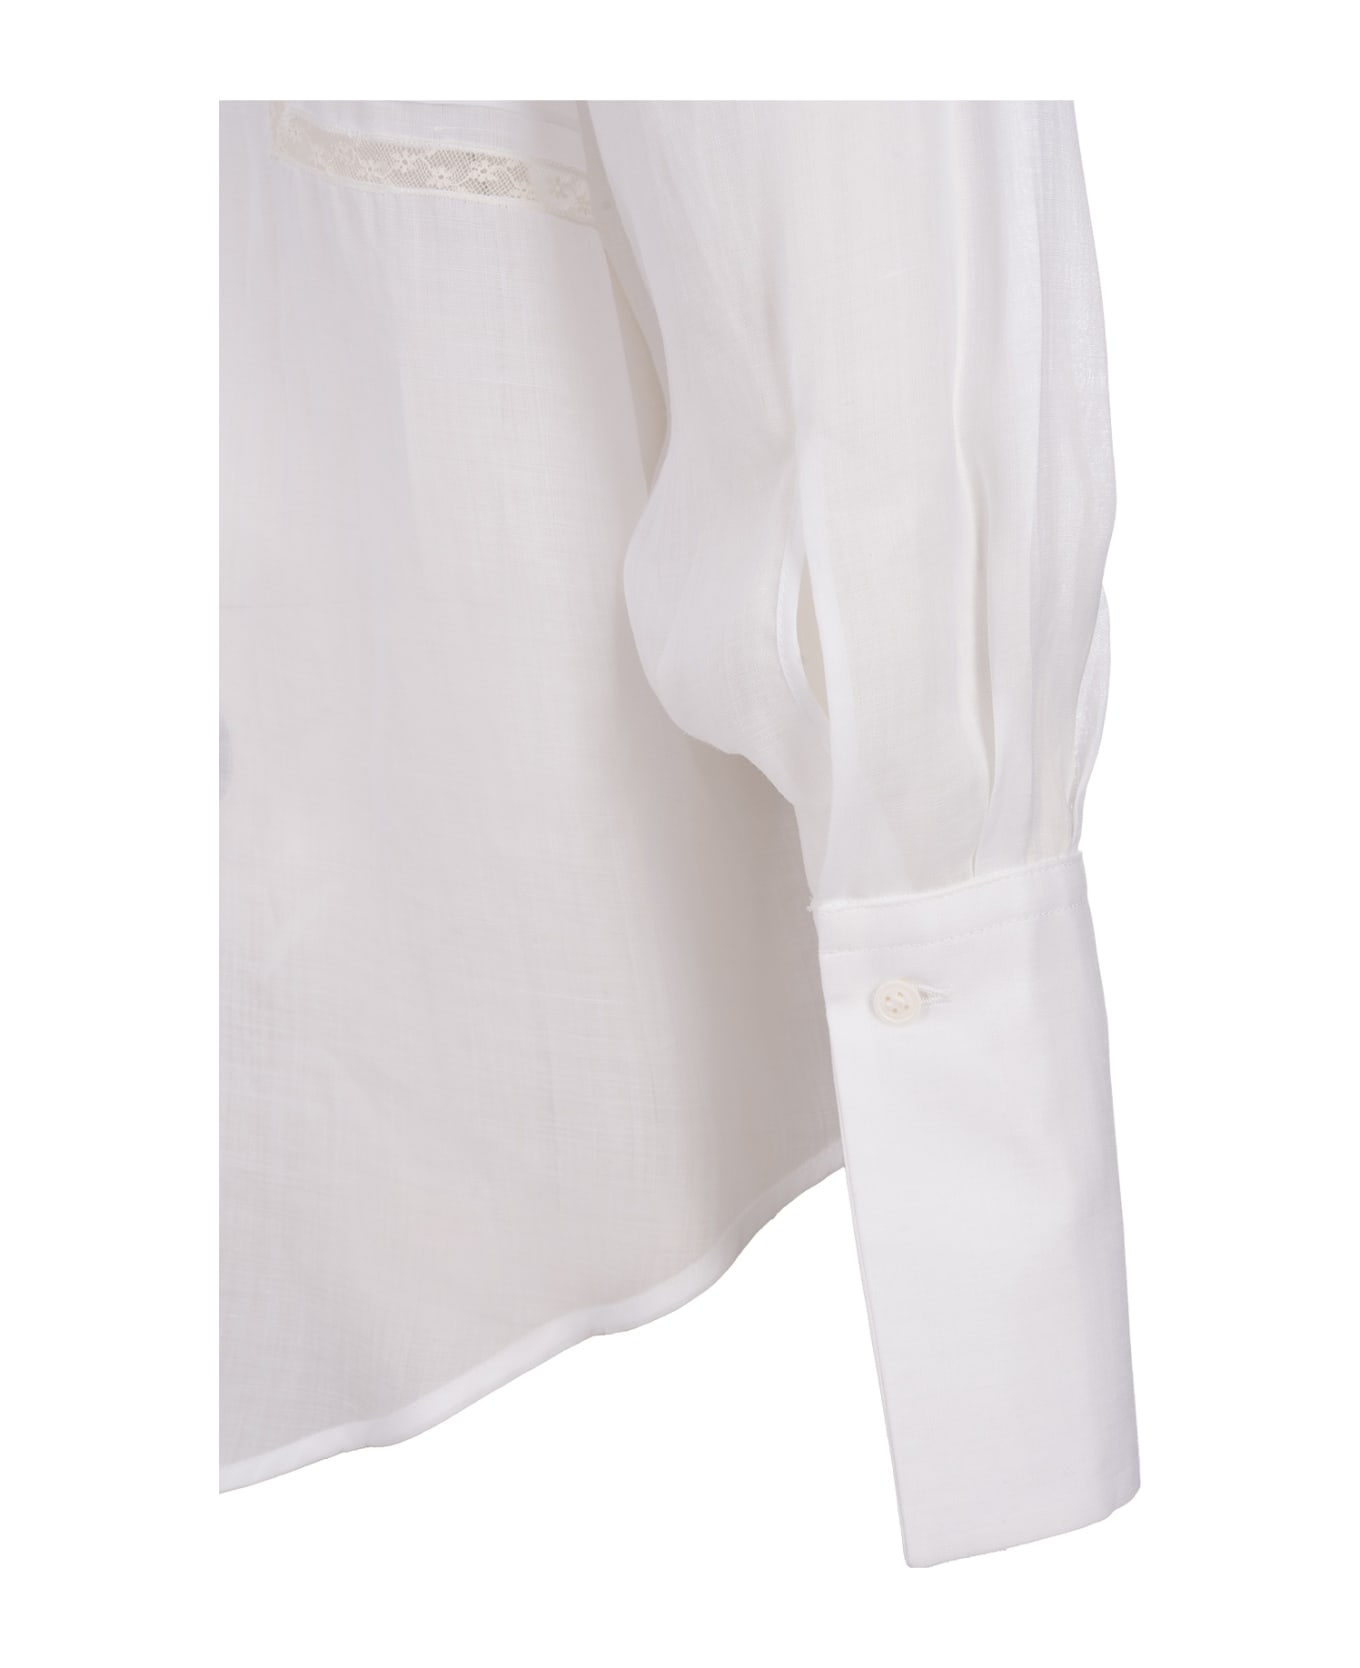 Ermanno Scervino White Ramie Shirt With Valenciennes Lace - White